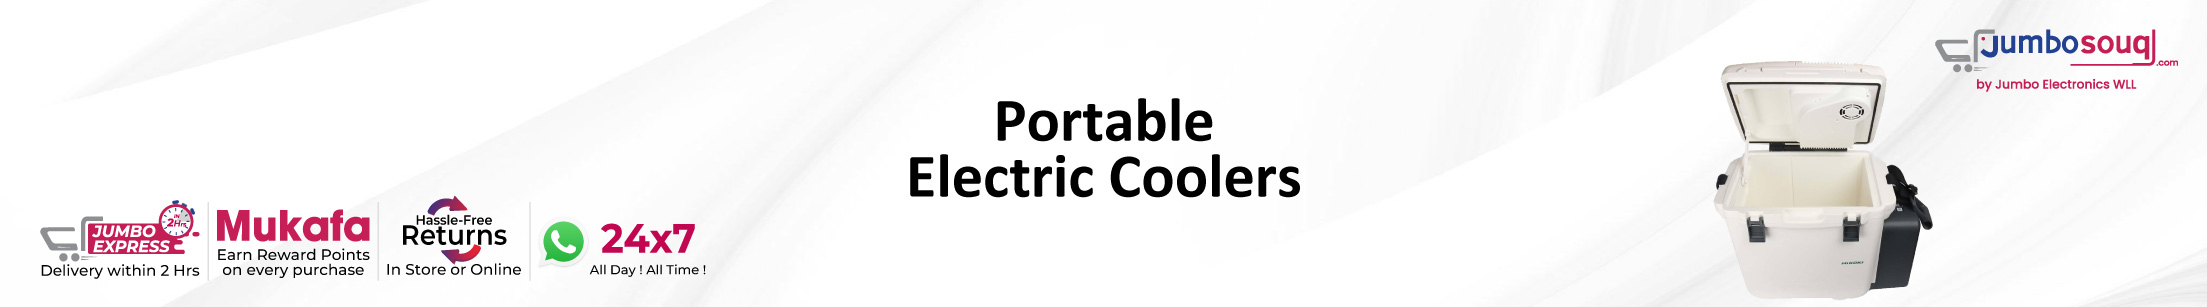 Portable Electric Coolers